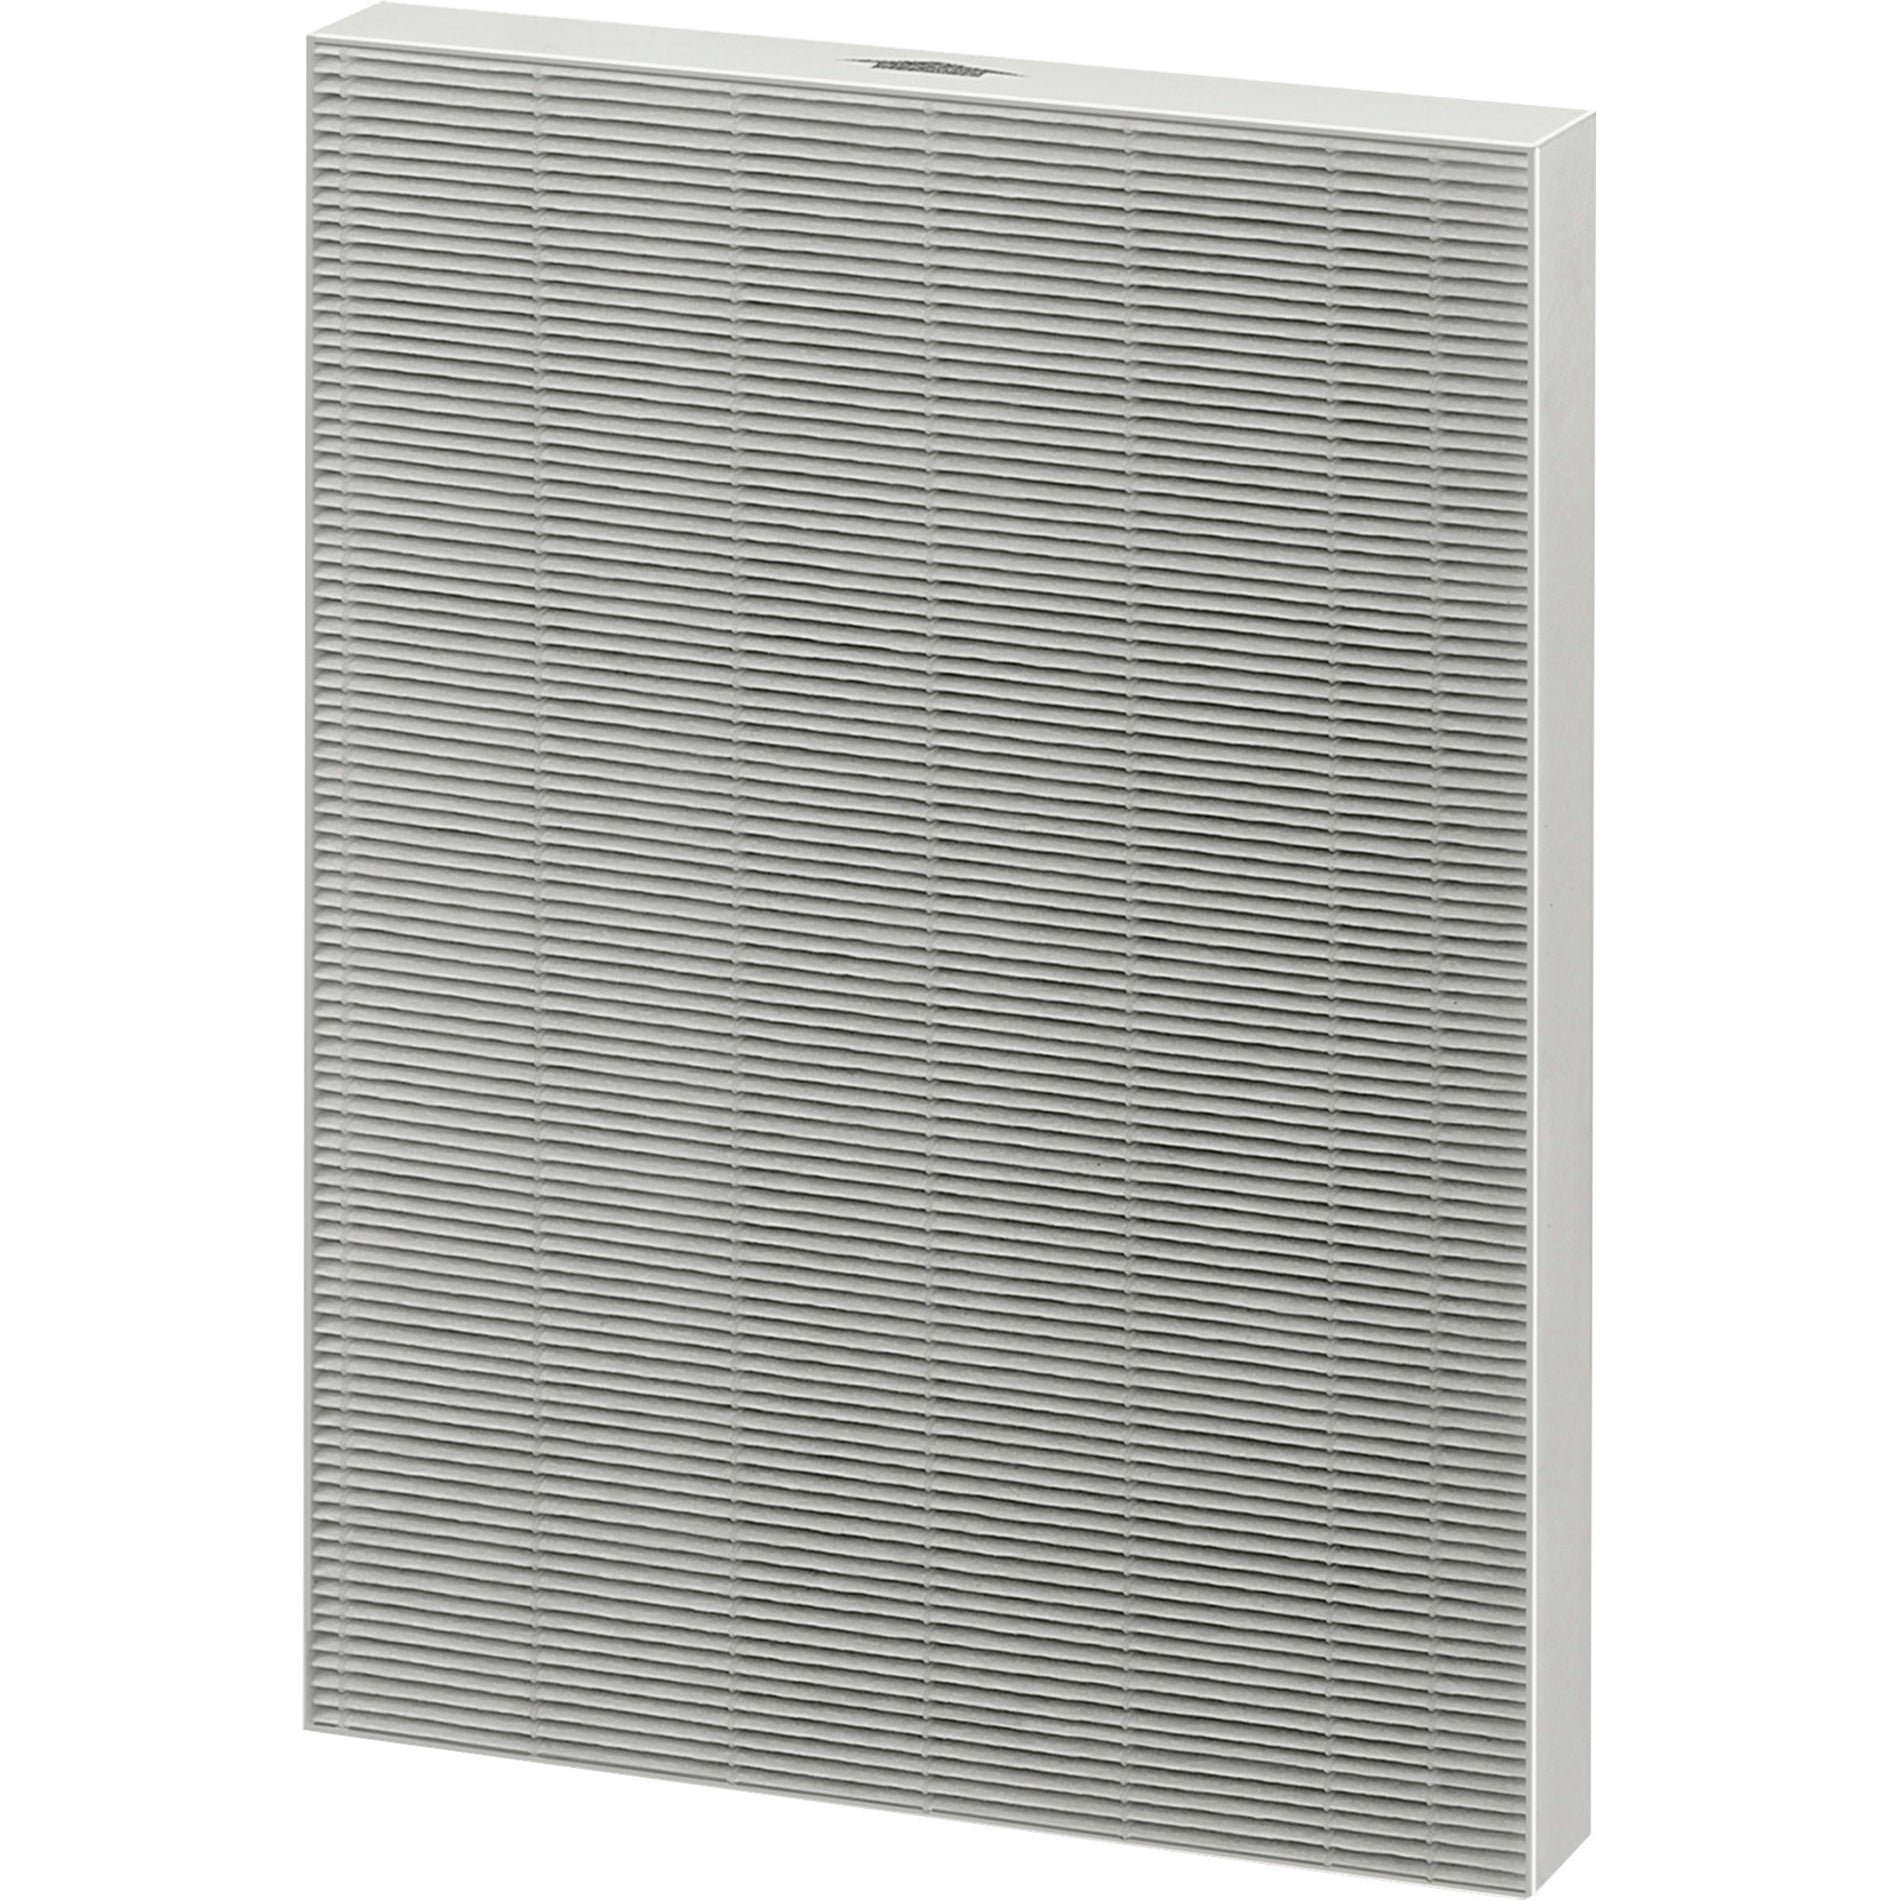 Fellowes 9370001 HF-230 True HEPA Replacement Filter for AP-230PH Air Purifier, Remove Airborne Particles, Virus, Dust Mite, Germs, Pet Dander, Smoke, Ragweed, Odor, Mold Spores, Allergens, Pollen